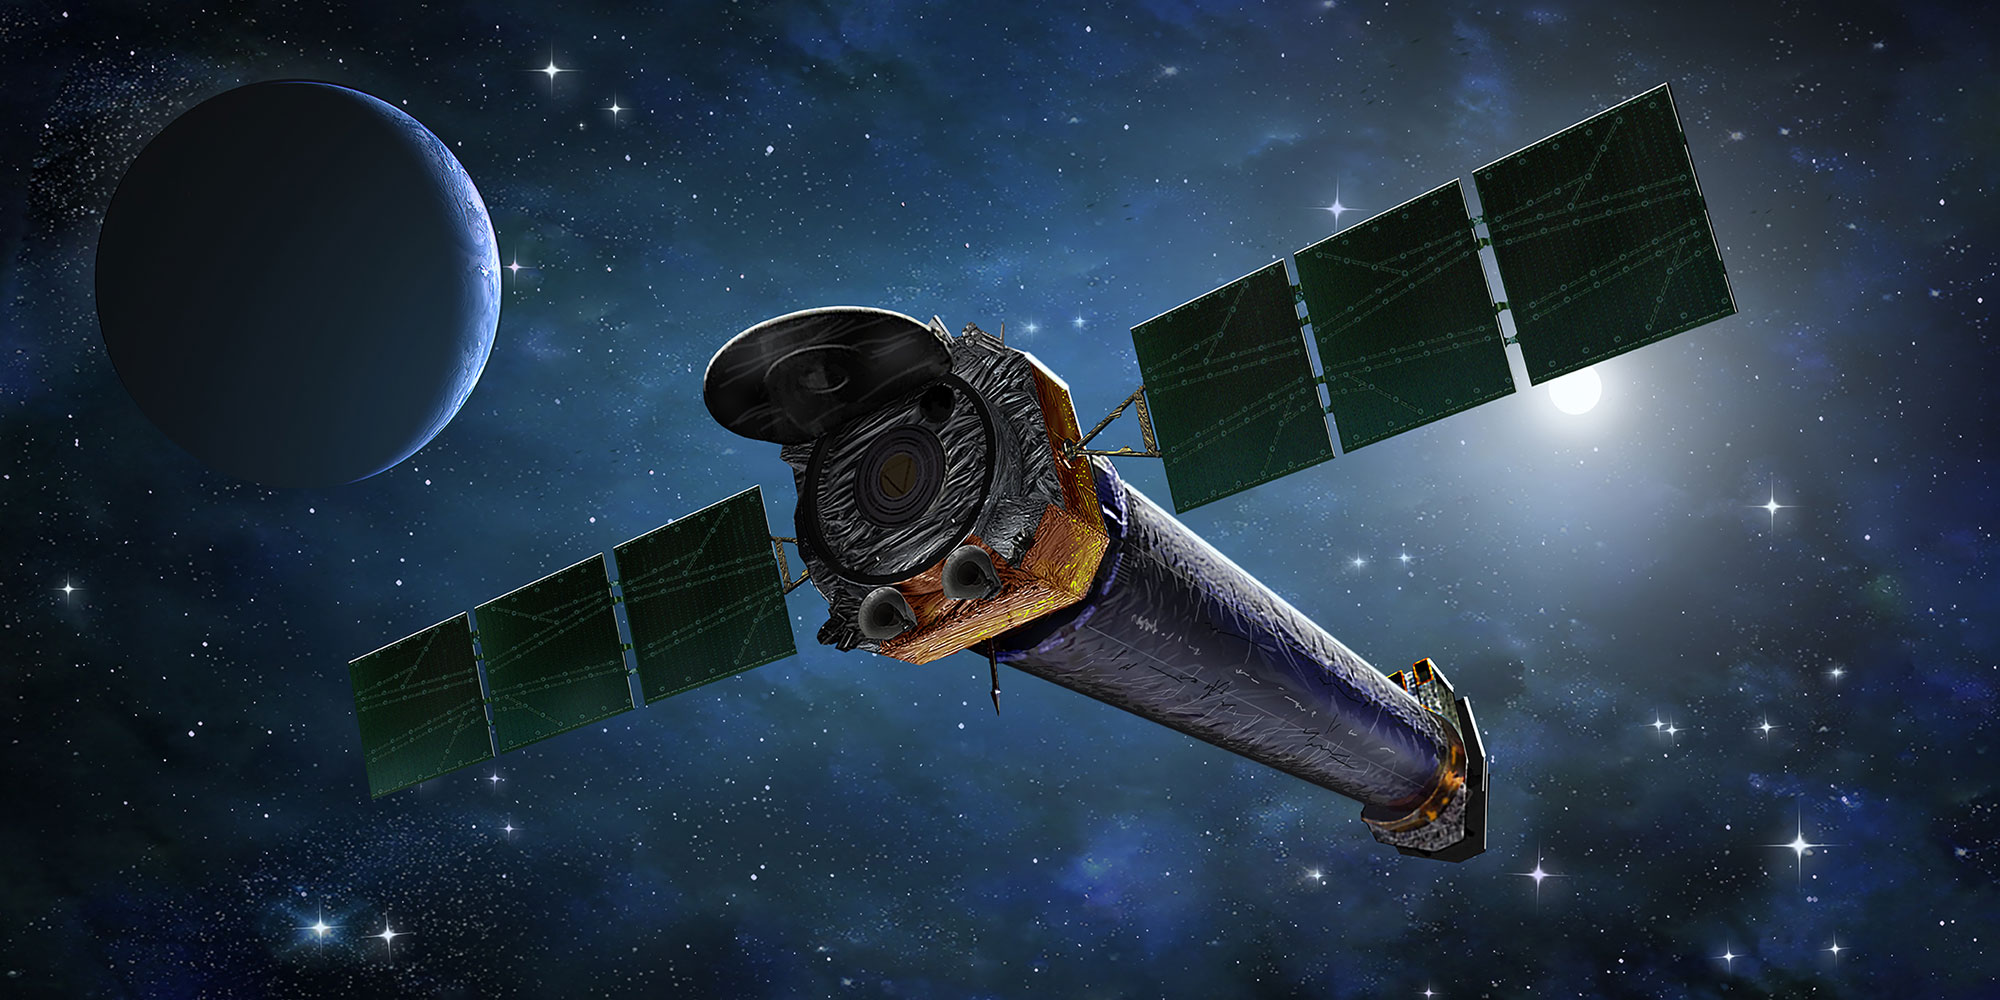 Chandra X-ray Observatory in Space